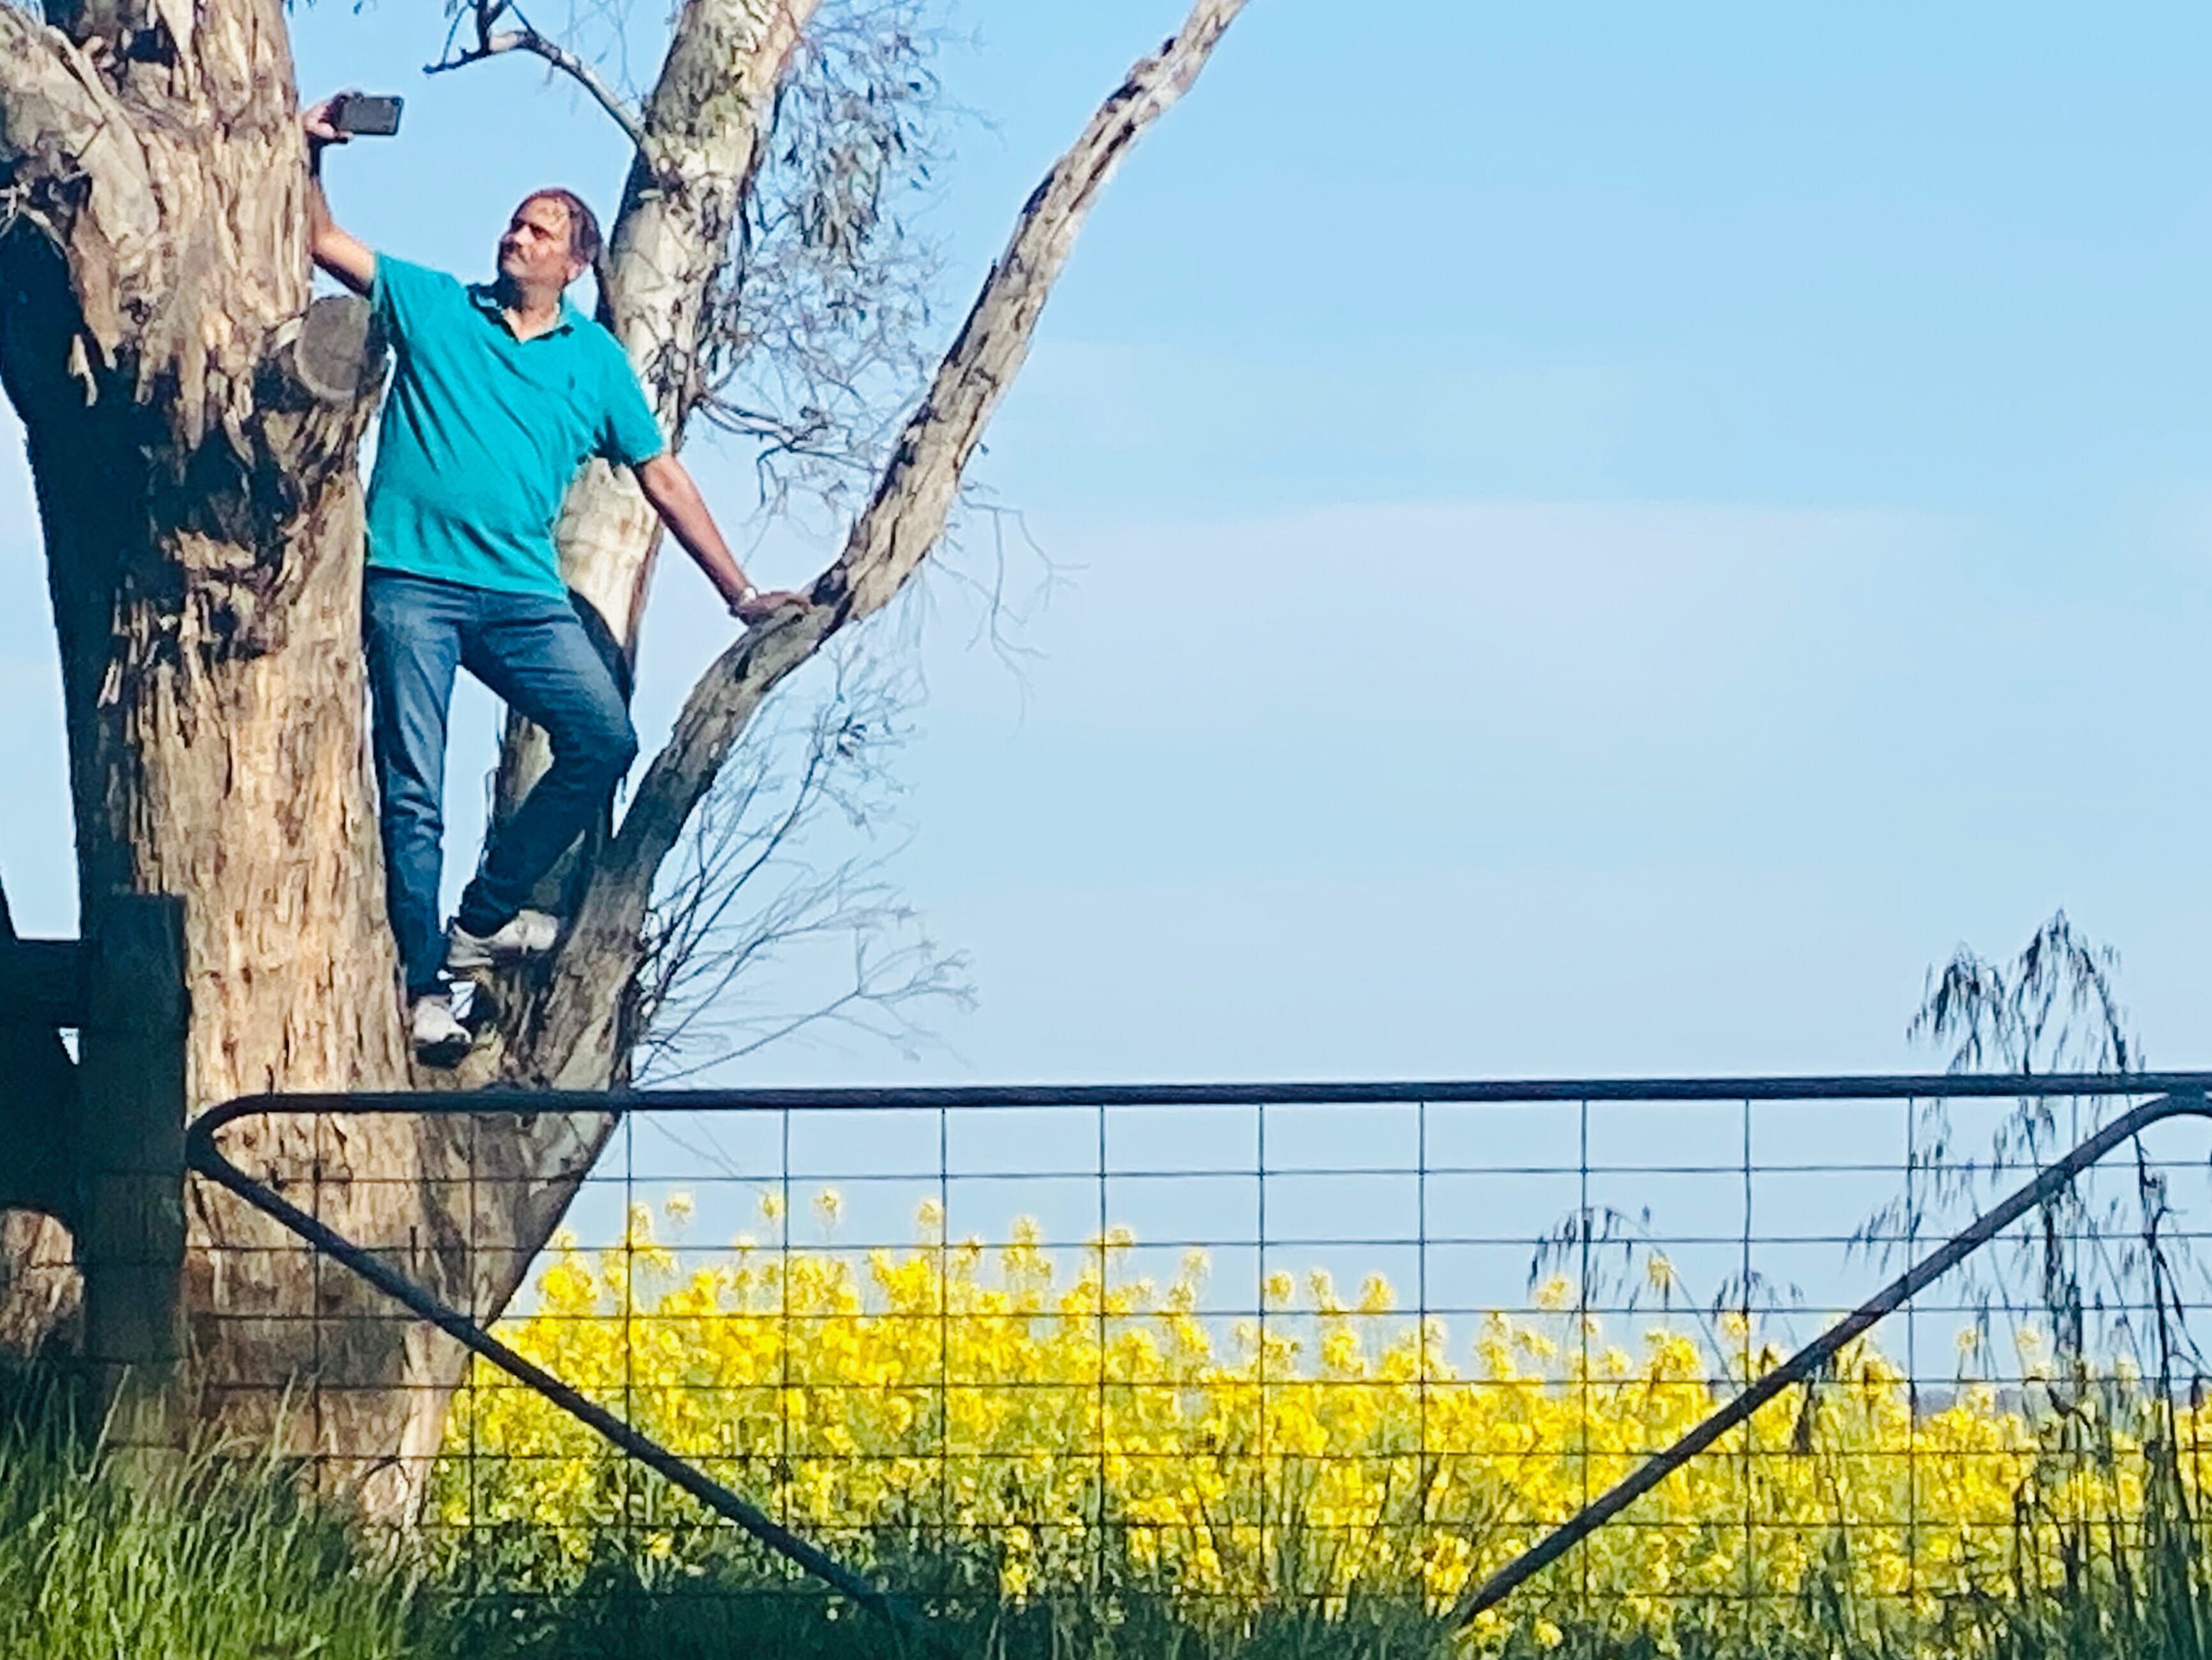 Instagrammers swarm canola fields and frustrate farmers